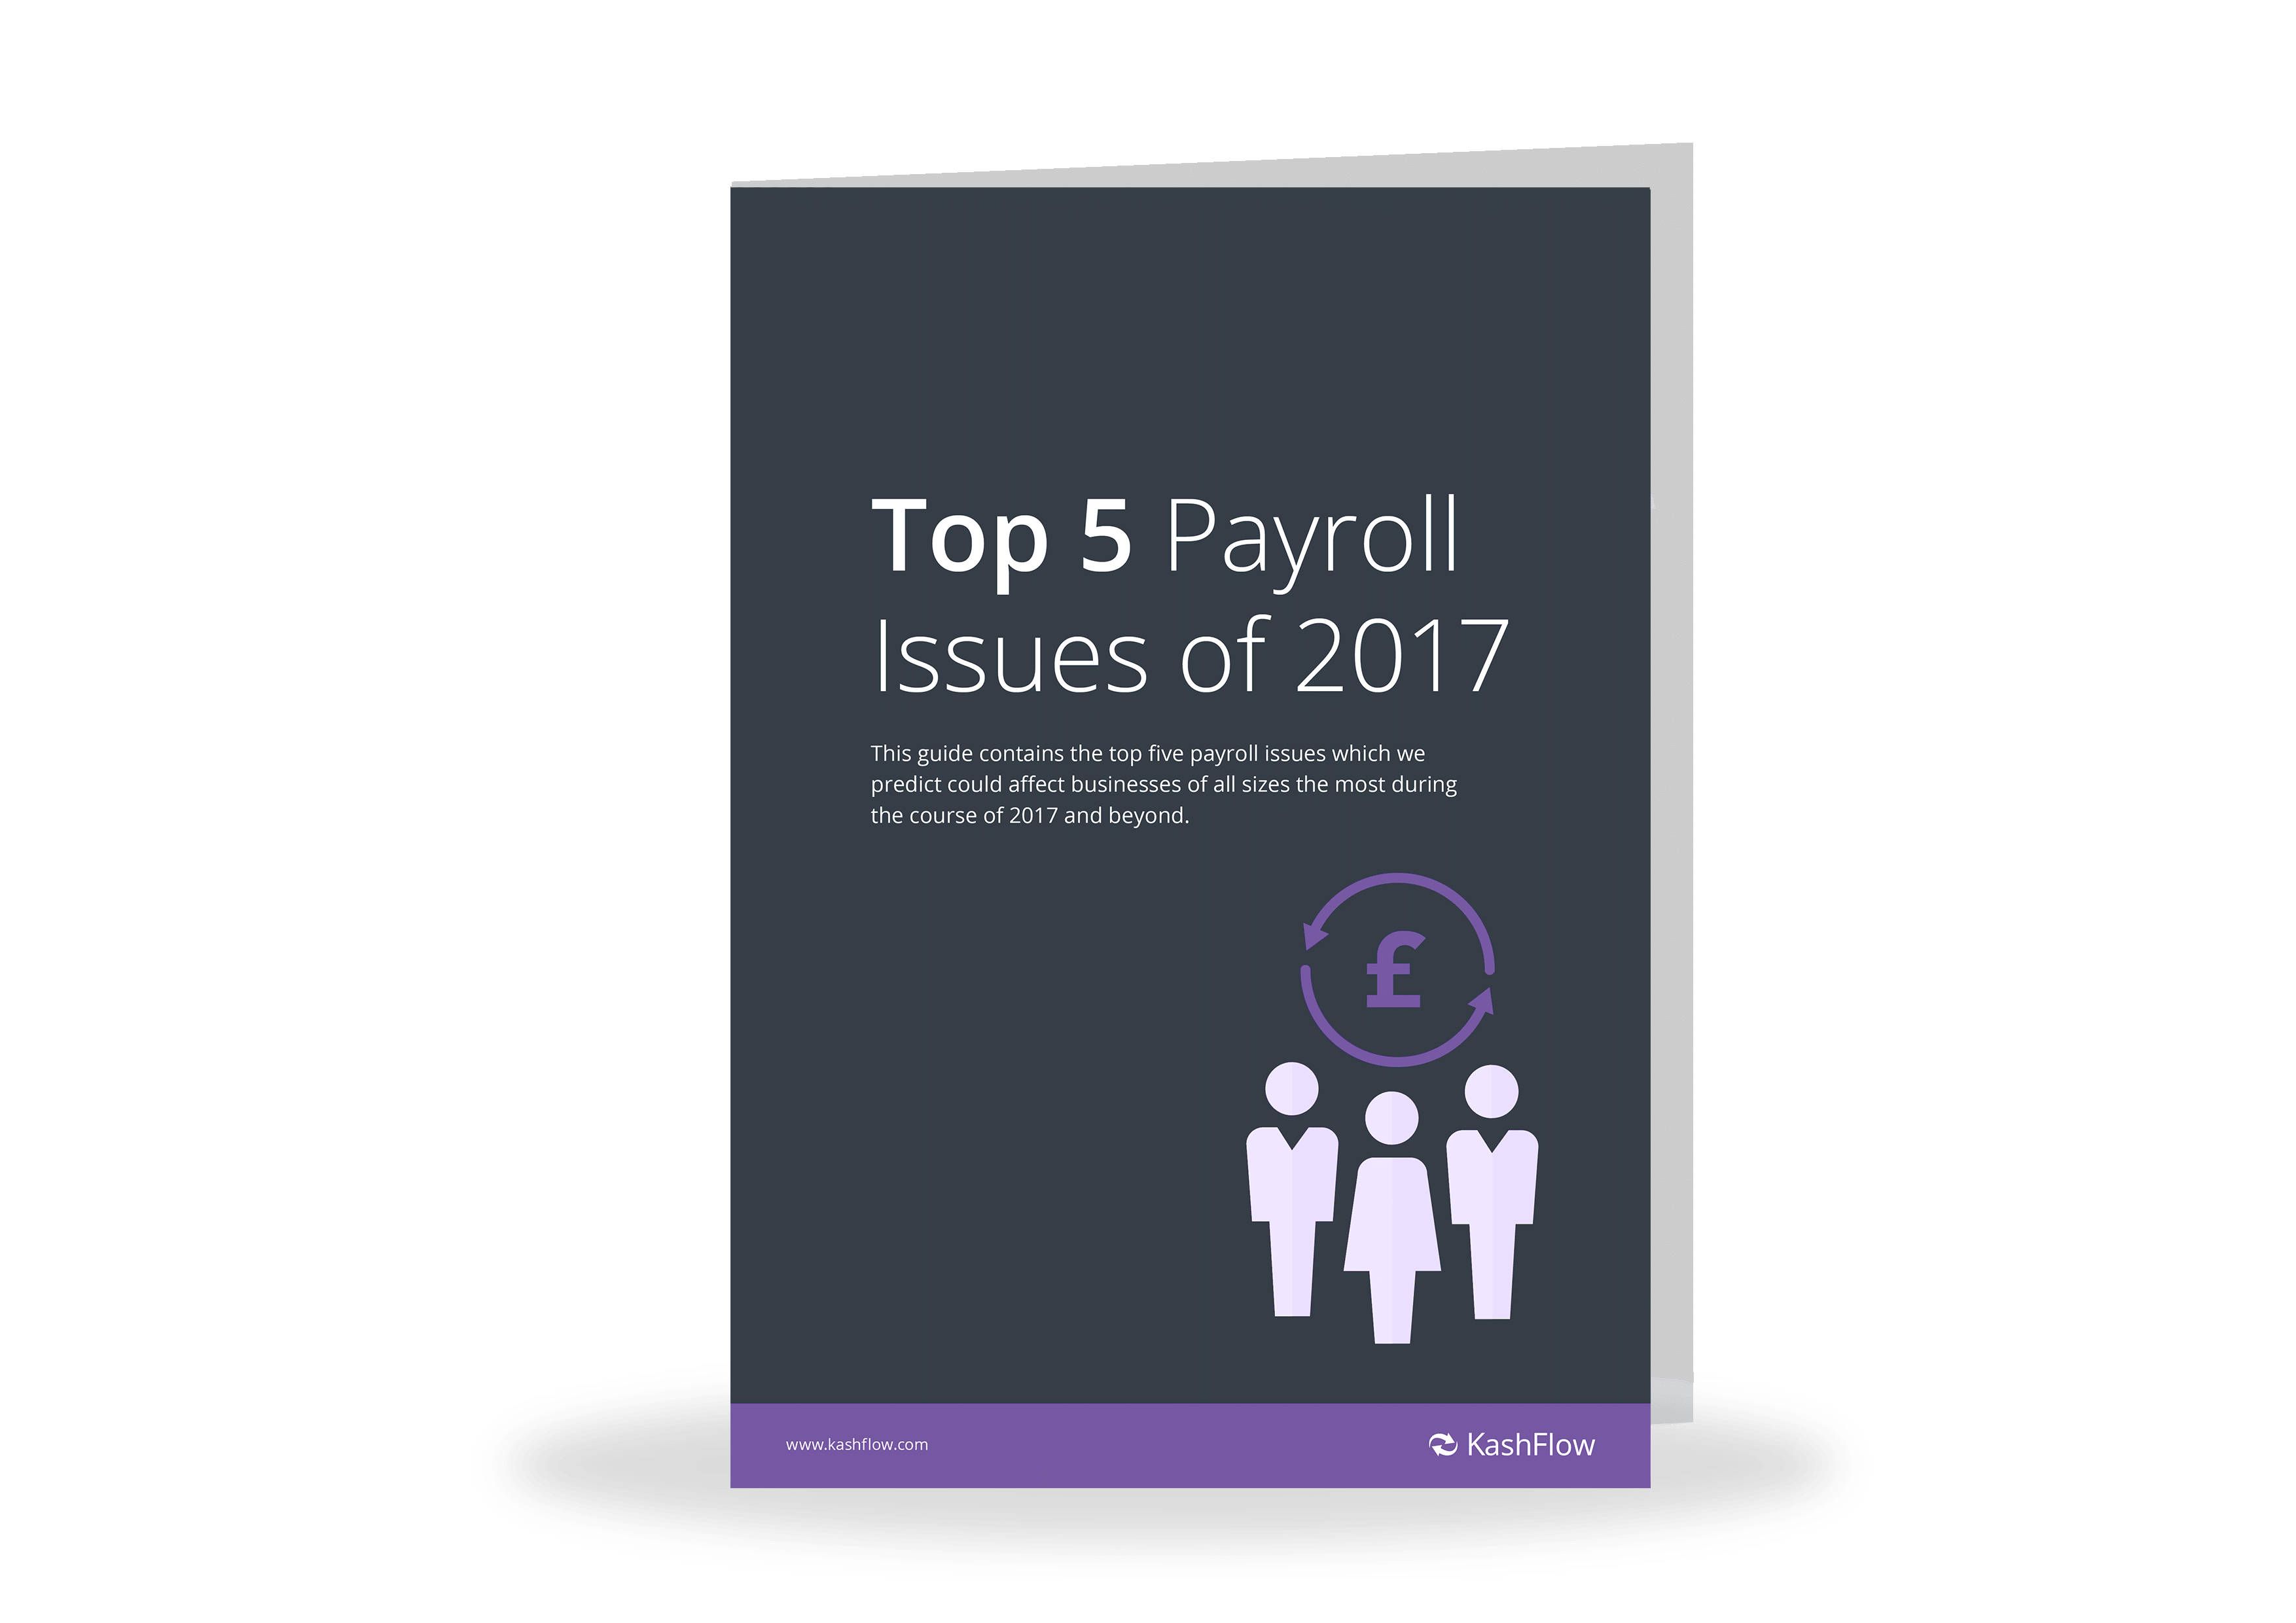 Top 5 Payroll Issues 2017